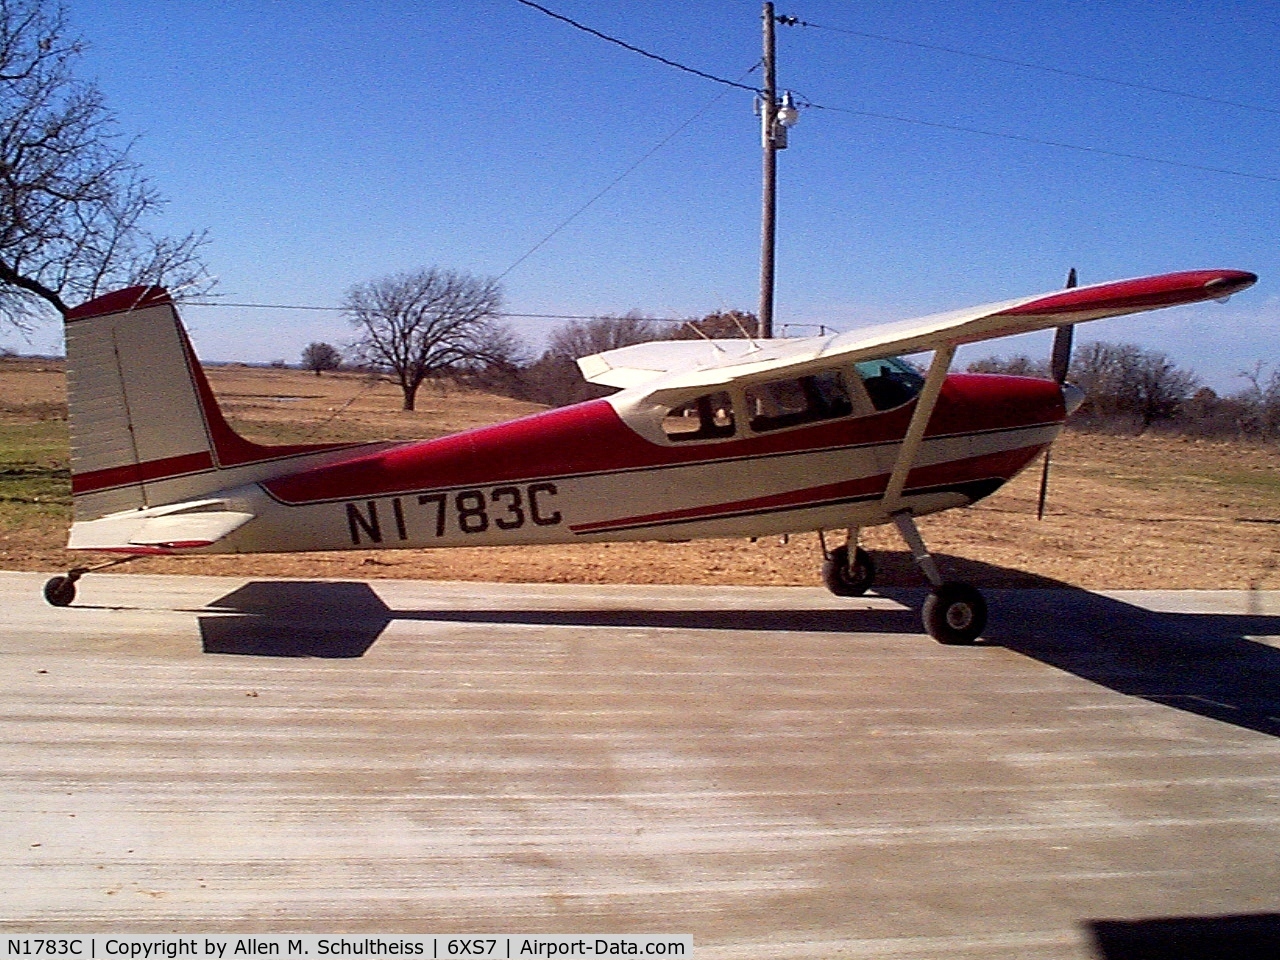 N1783C, Cessna 180 C/N 30483, Cessna 180 that was destroyed in hangar fire